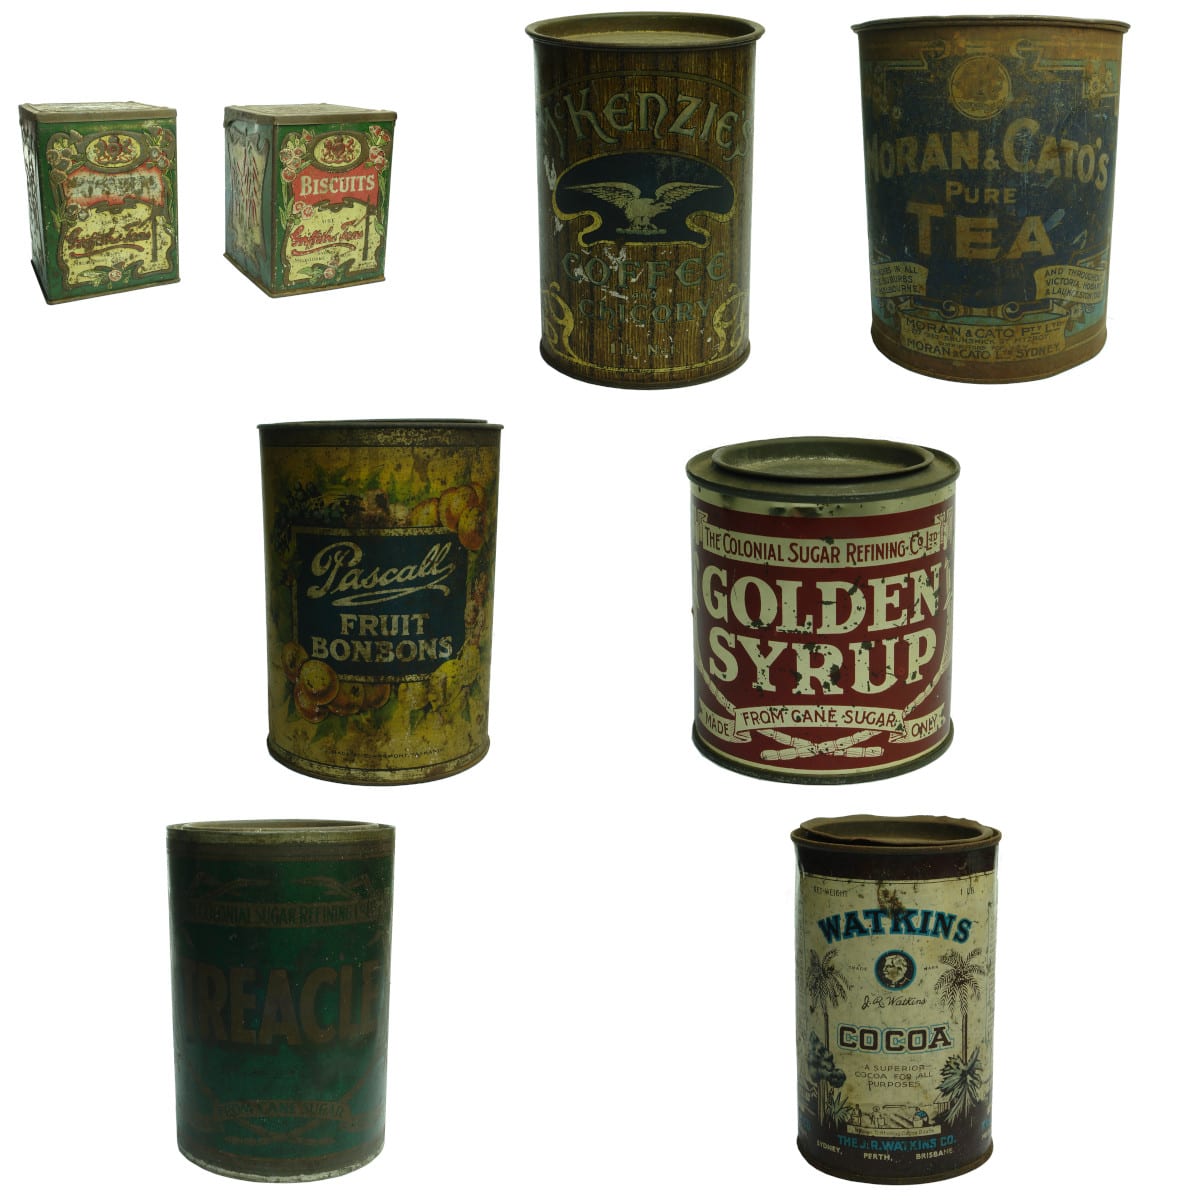 8 Tins: 2 x Griffiths; McKenzies; Moran & Cato's; Pascall; Colonial Sugar Refining Co x 2; Watkins.